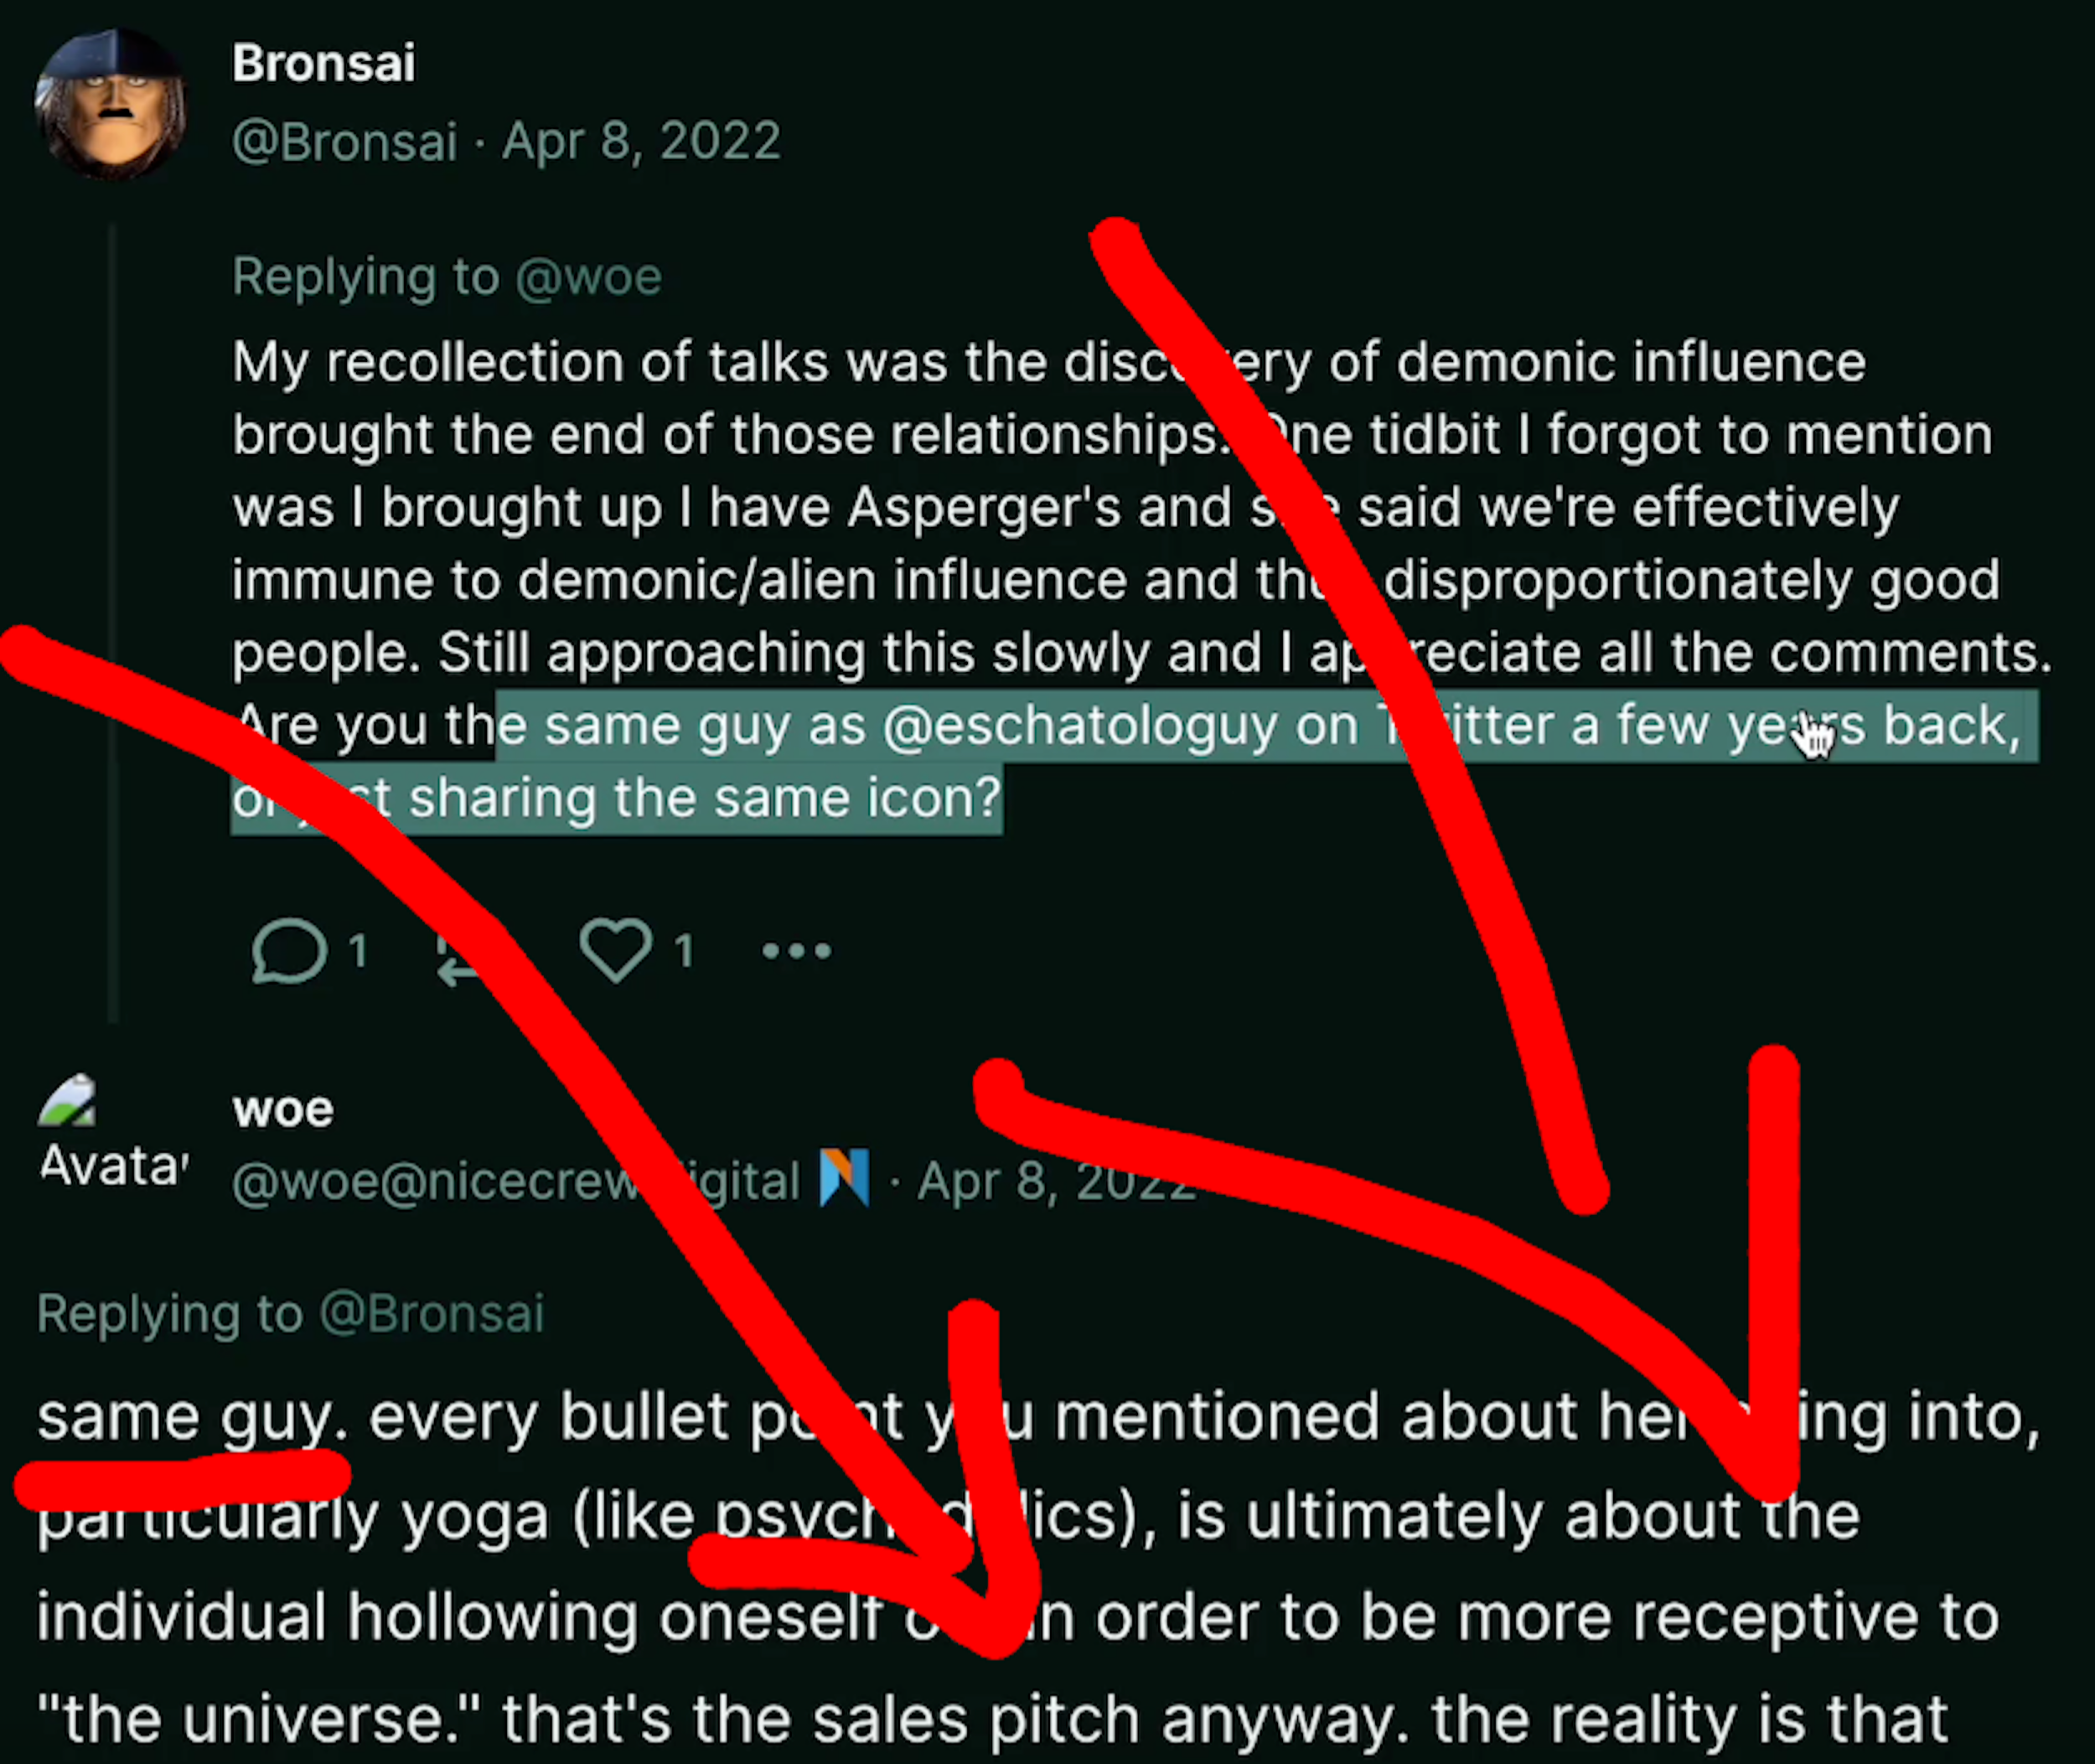 "Bronsai" in Poast tells Woe about his discovery of demonic influence, as well as his history of having Asbergers and someone telling him that that makes him immune to demonic/alien influence. Bronsai then asks, "Are you the same guy as @eschatologuy on Twitter a few years back, or just sharing the same icon?" Dumperth responds: "Same guy" and goes on to talk about yoga "hollowing oneself out" which presumably leads to demon possession.